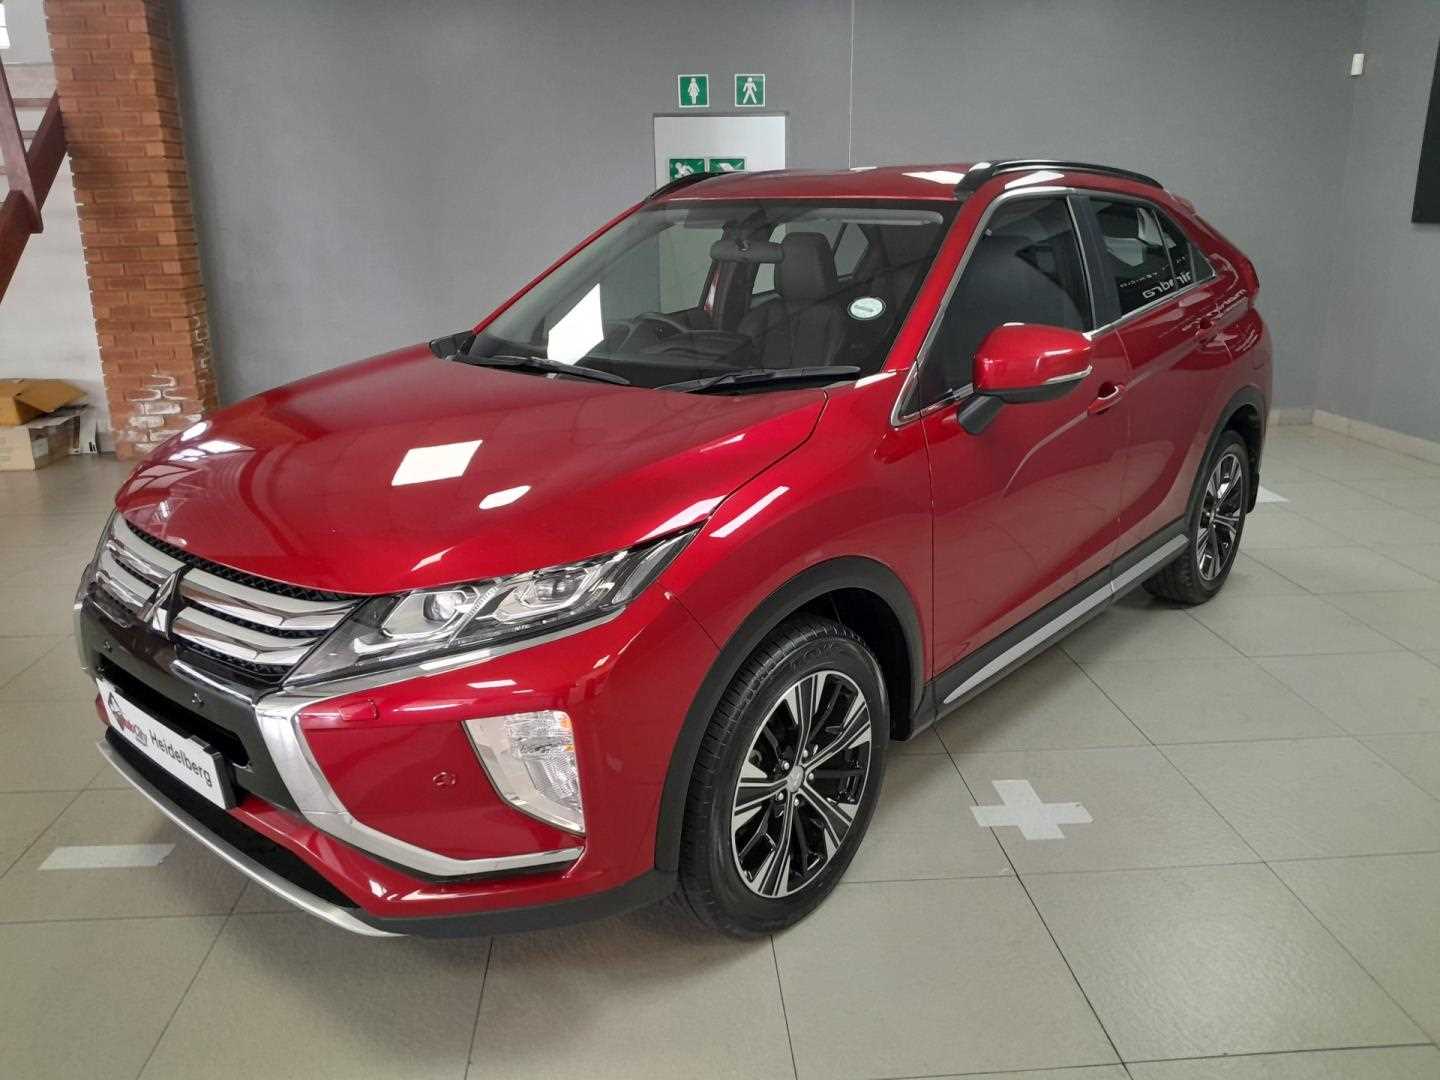 MITSUBISHI ECLIPSE CROSS 2.0 GLS CVT for Sale in South Africa